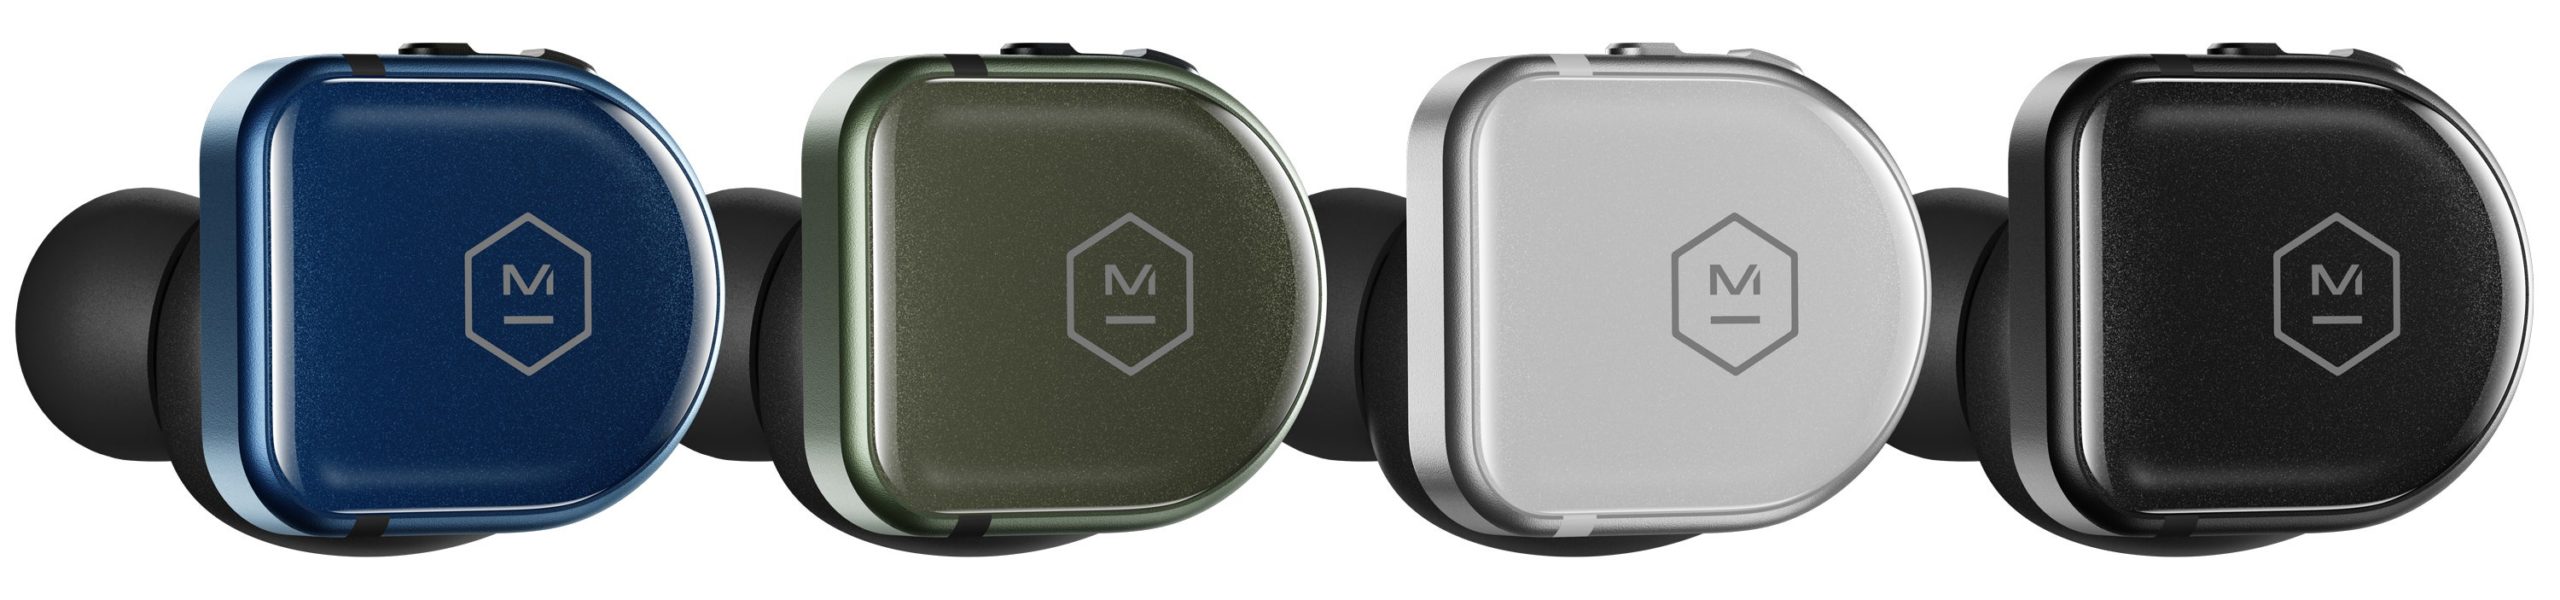 The MW08 Sport earbuds are available in blue, green, silver, and black, but the charging case is only available in black Kevlar. (Image: Master & Dynamic)